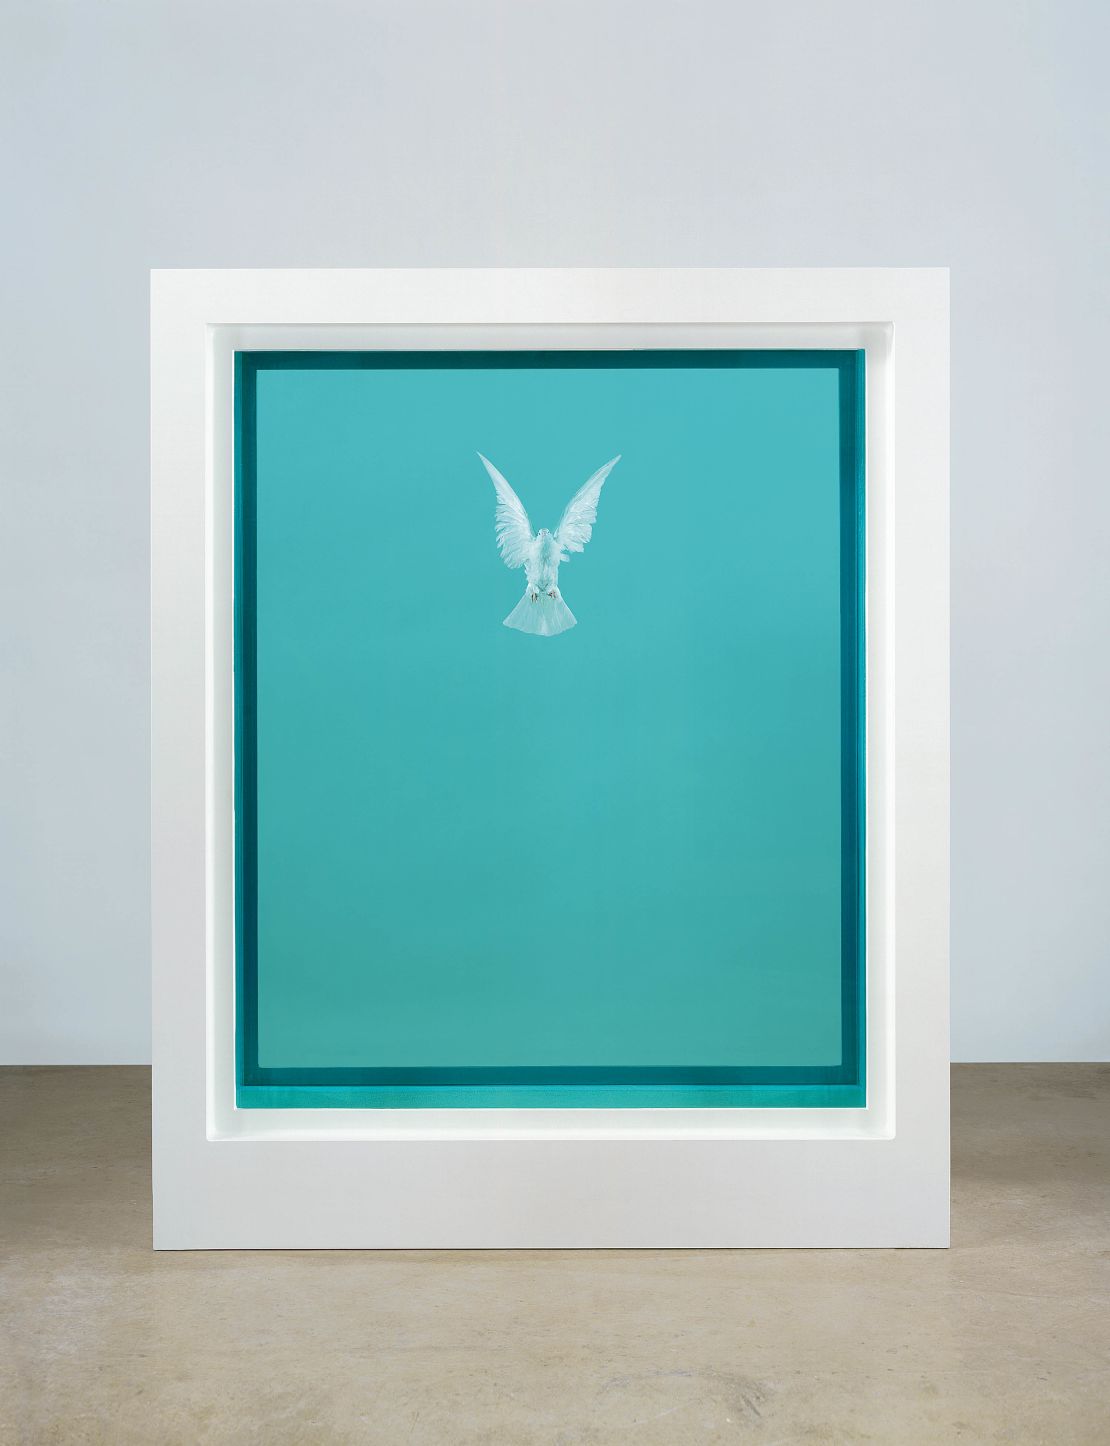 Damien Hirst's
The Incomplete Truth, from 2006.